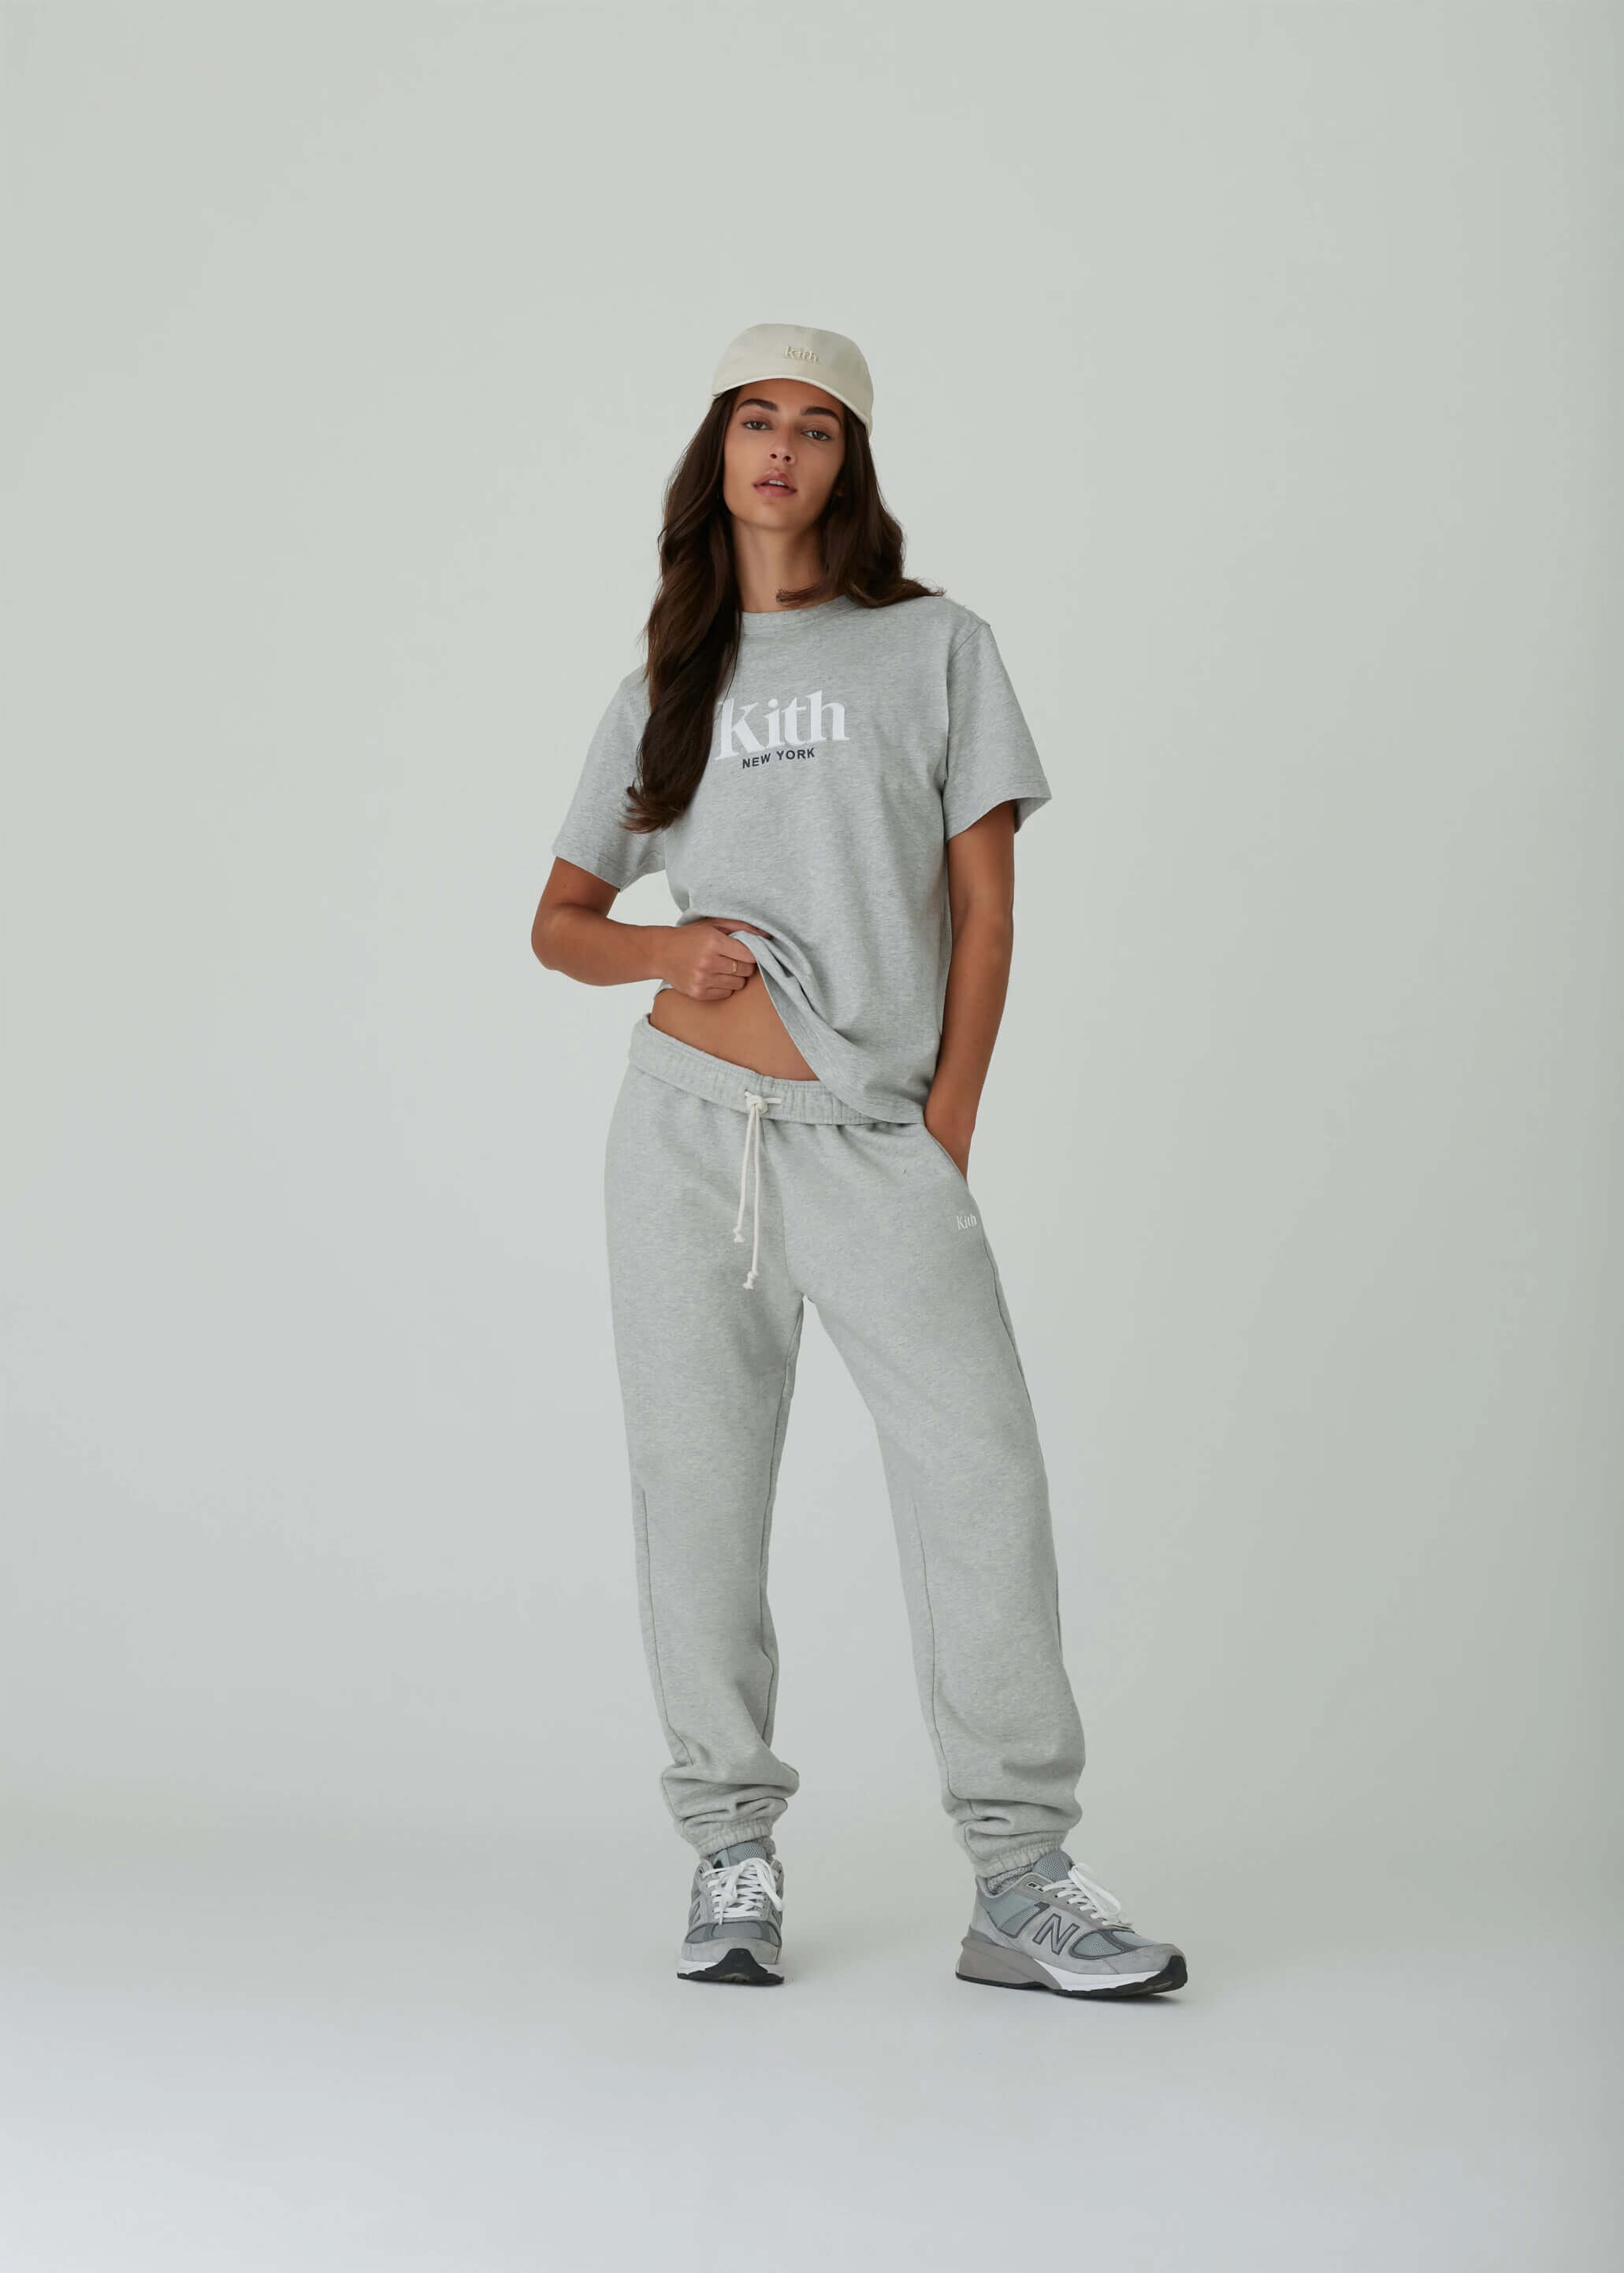 CNK-Kith-Spring-1-2021-Collection-Look-22.jpeg